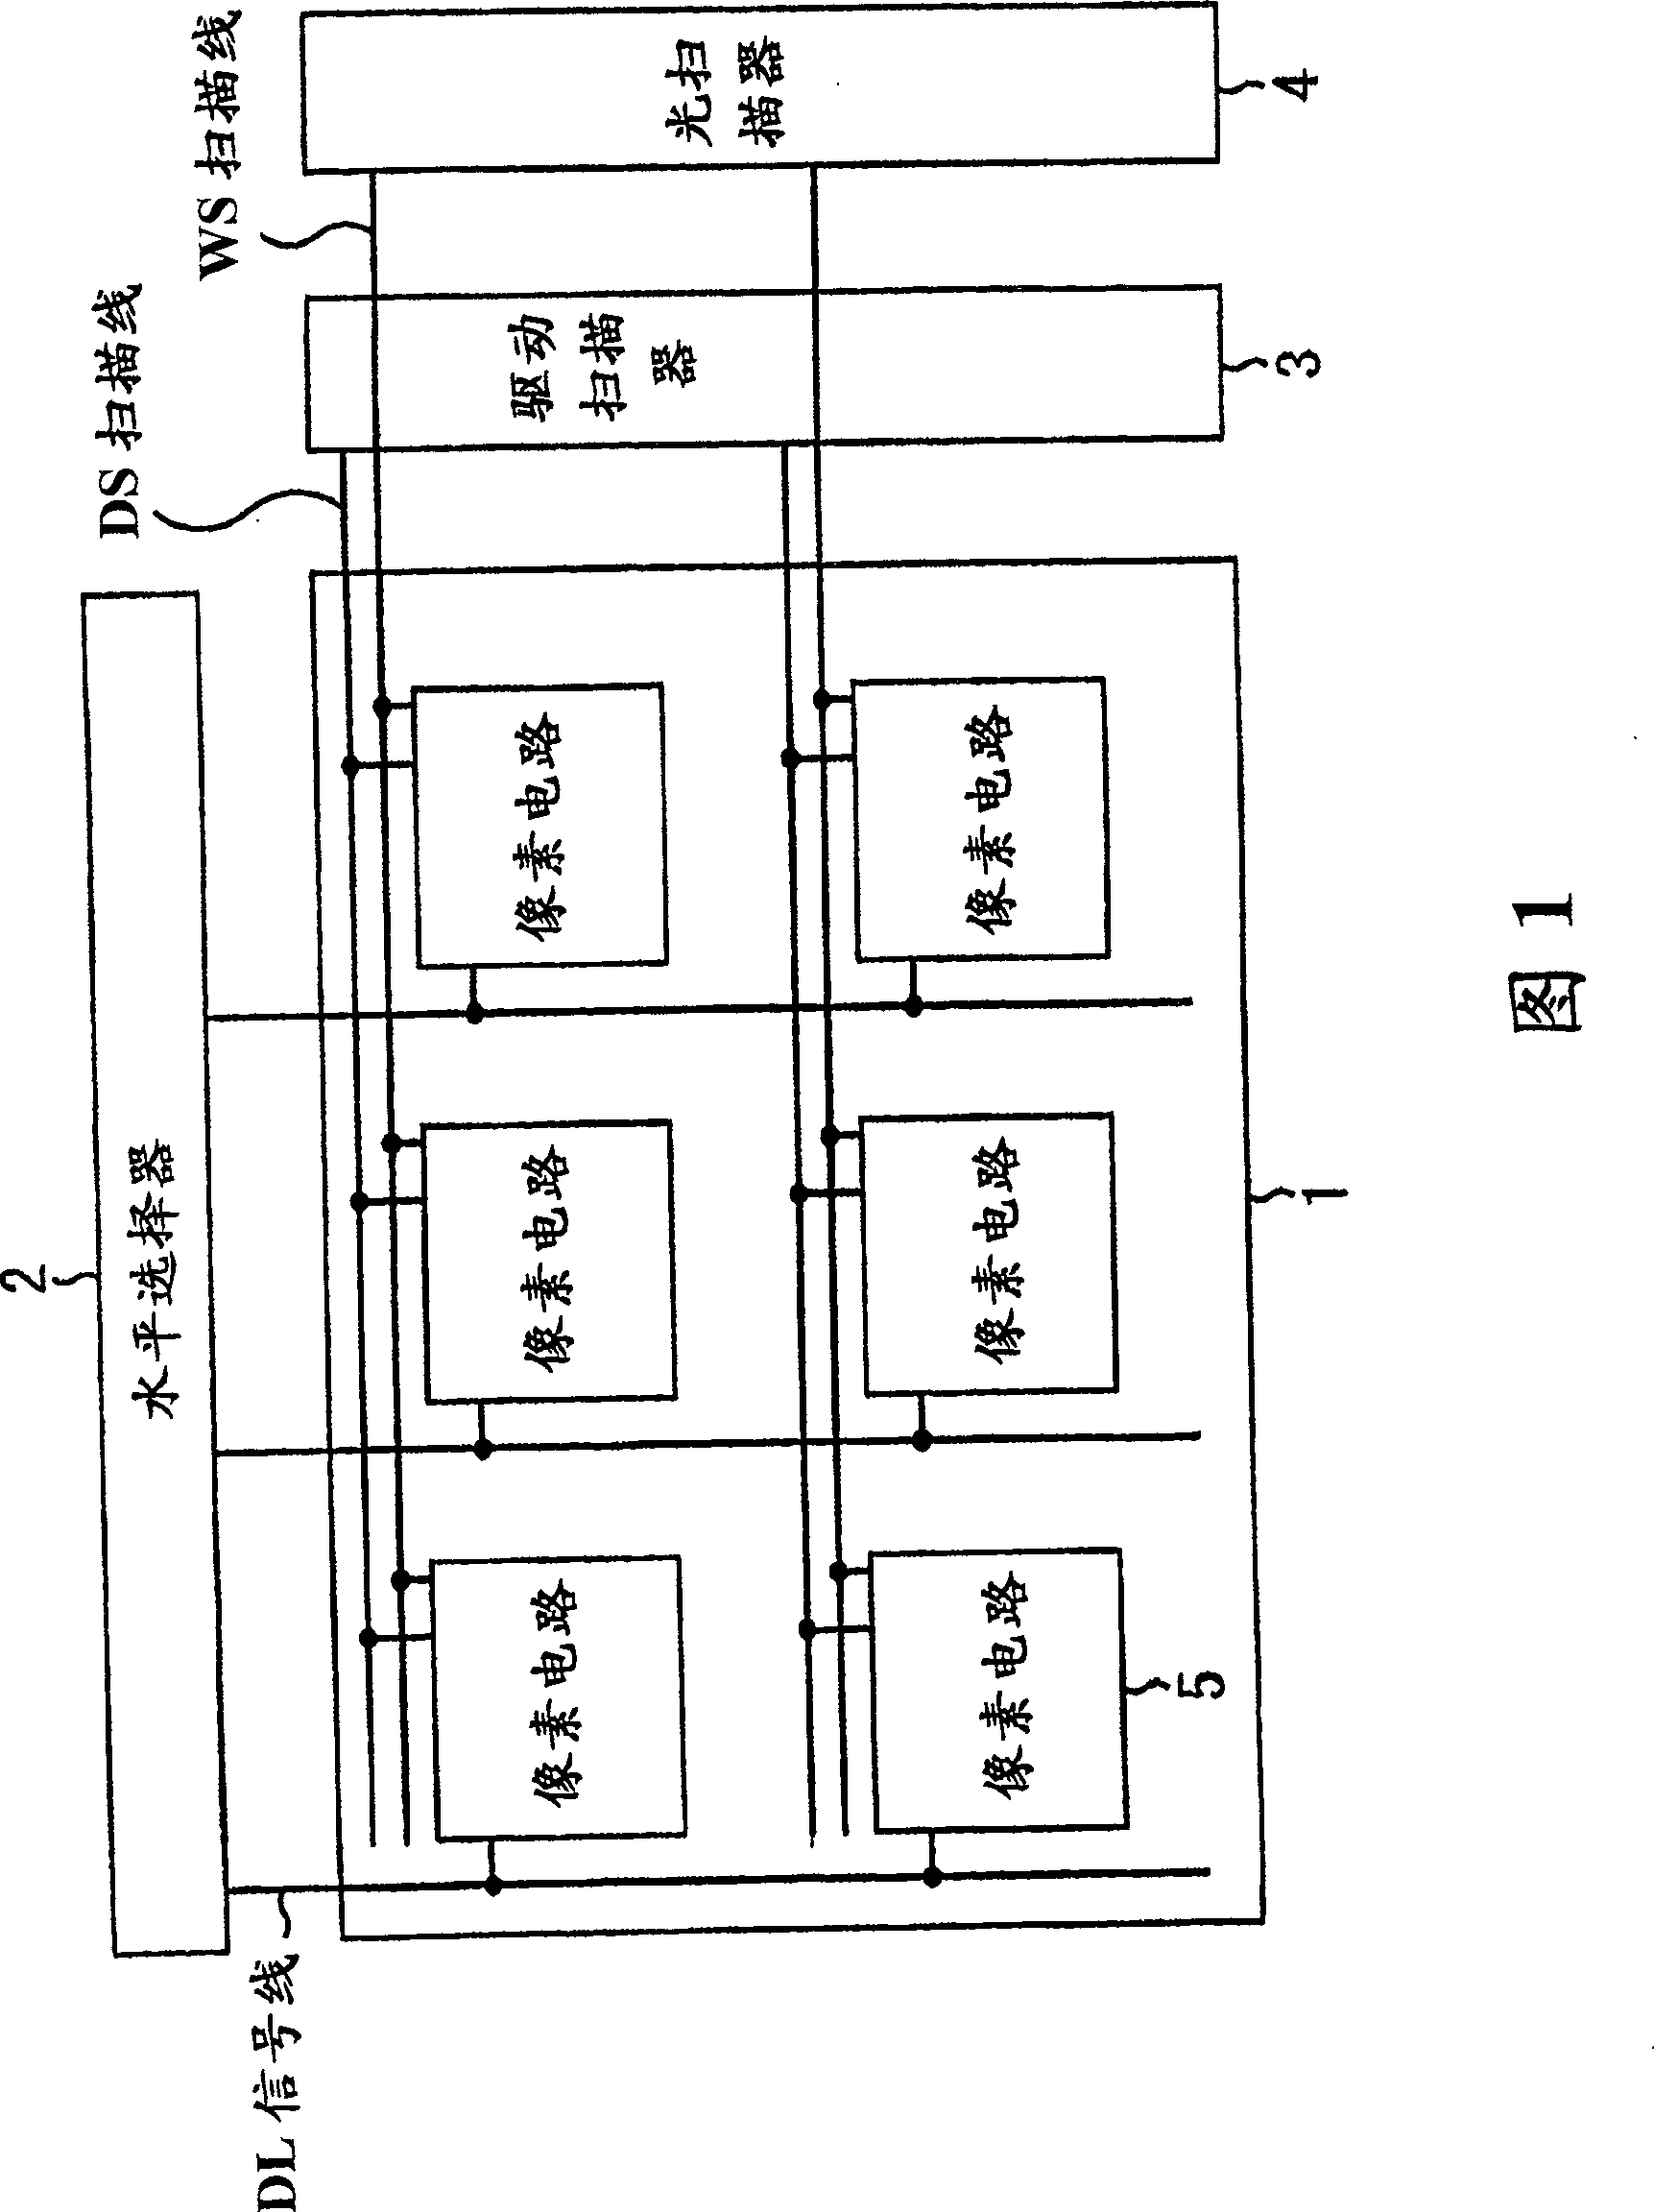 Pixel circuit, display device and driving method